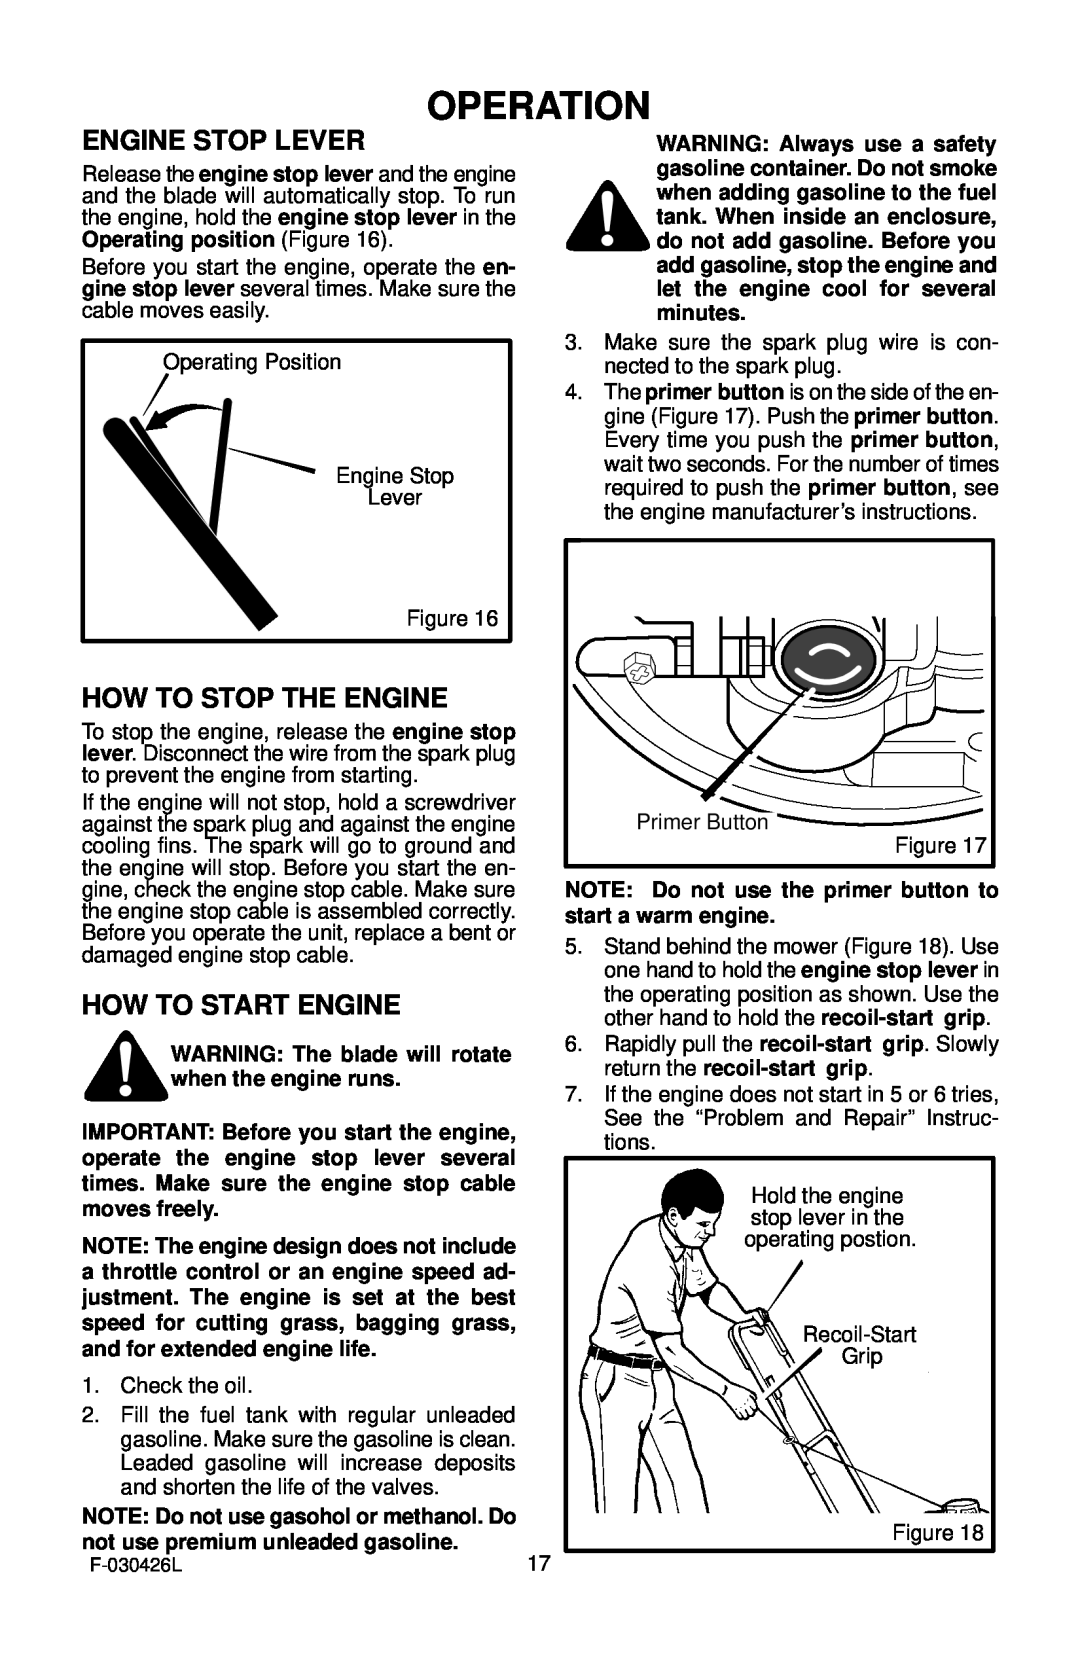 Murray 22" Push Operation, Engine Stop Lever, How To Stop The Engine, How To Start Engine, WARNING Always use a safety 